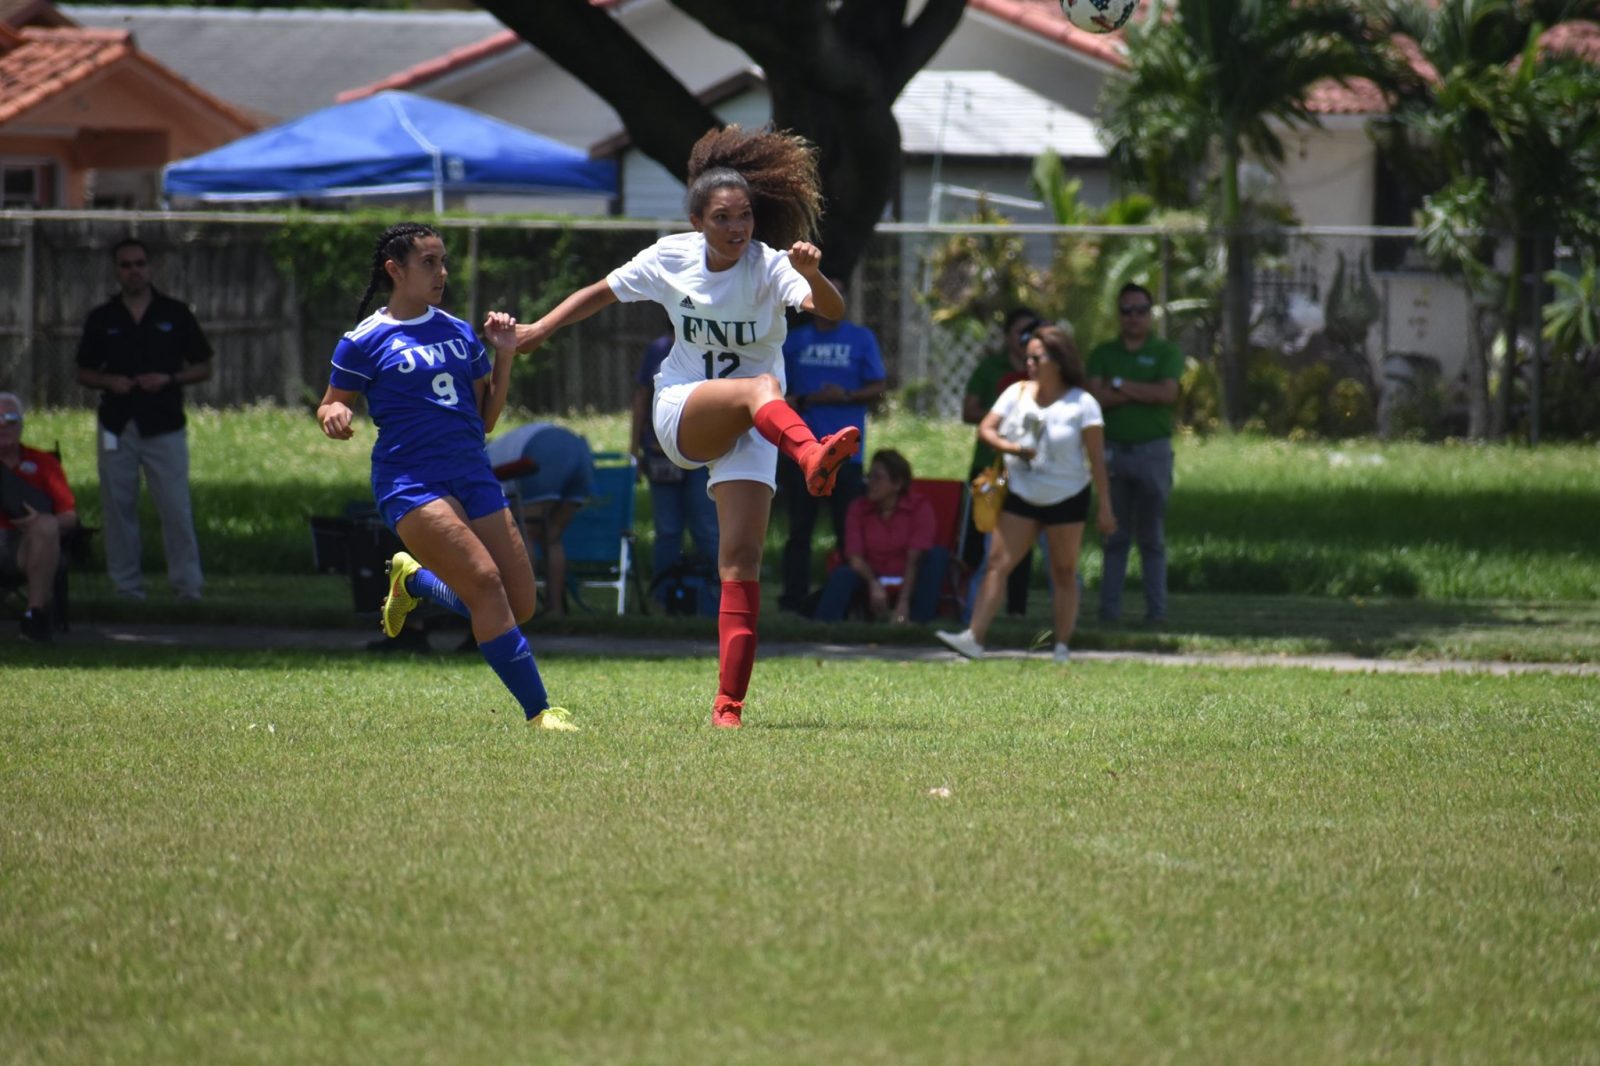 FNU player kicking the ball during the game